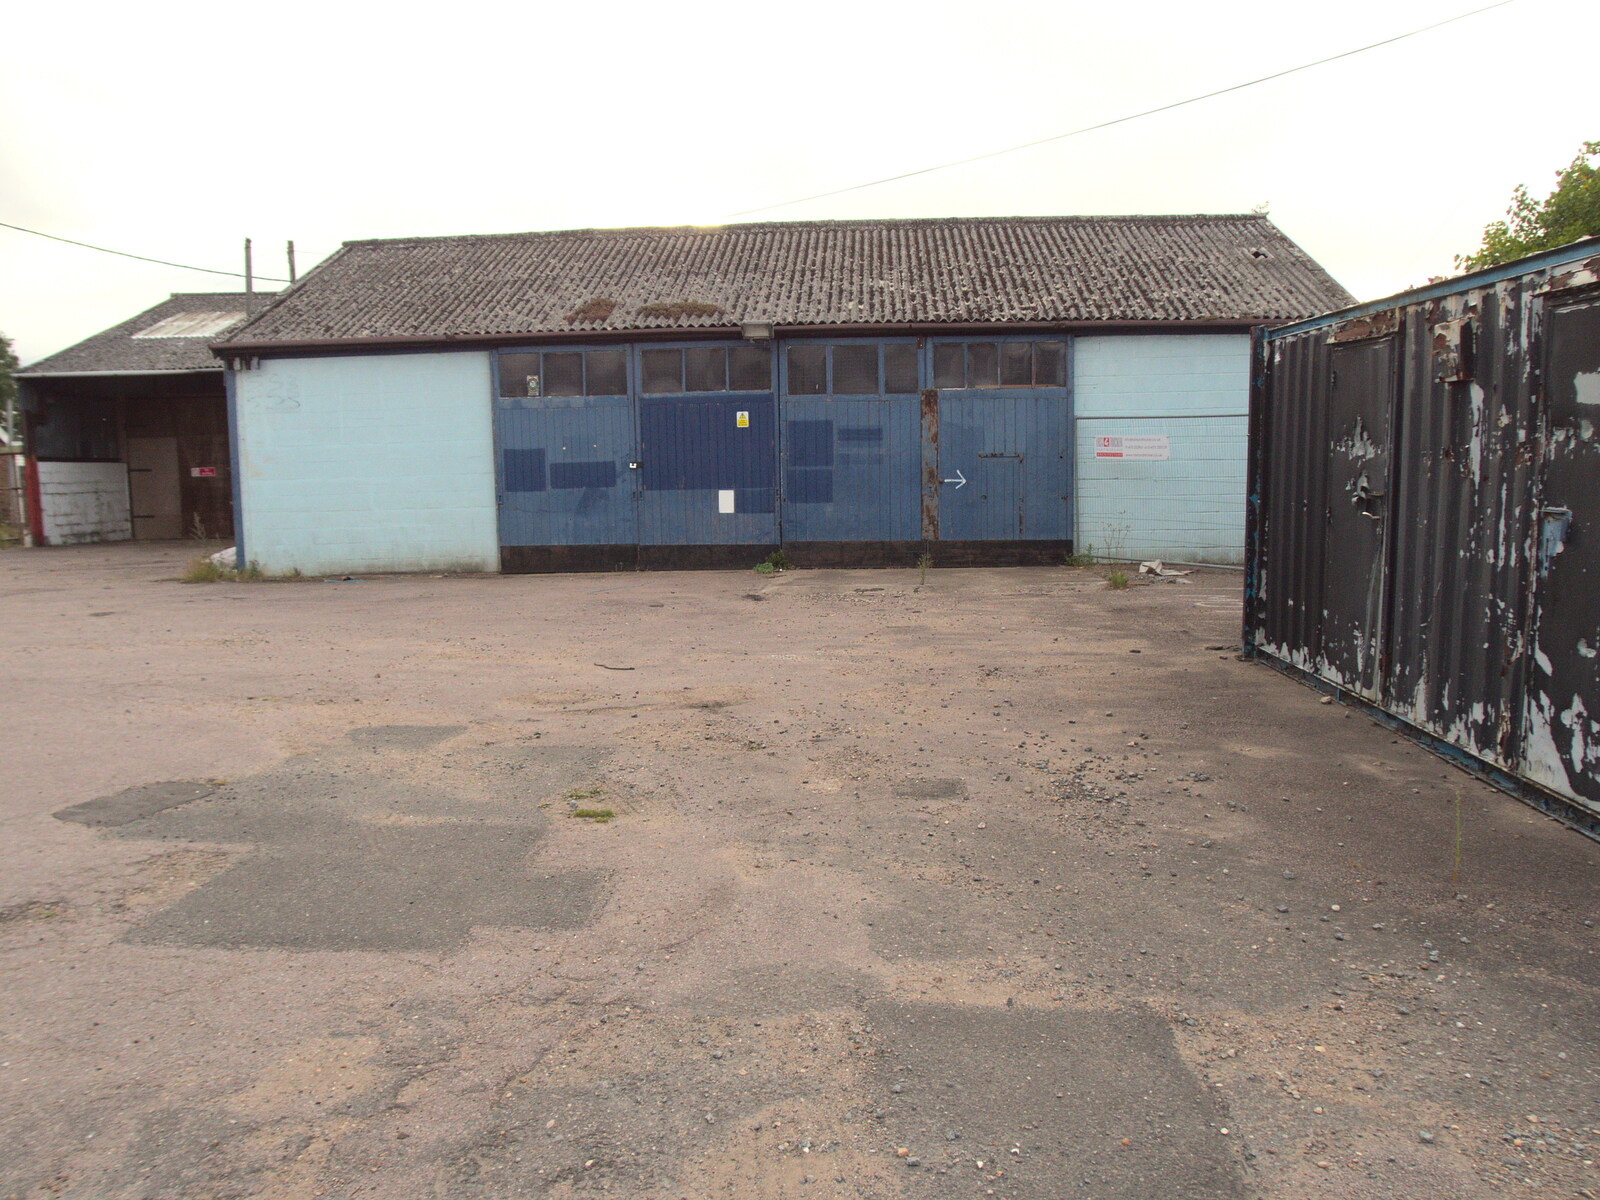 A derelict garage from The BSCC at The Crown, Dickleburgh, Norfolk - 19th August 2021